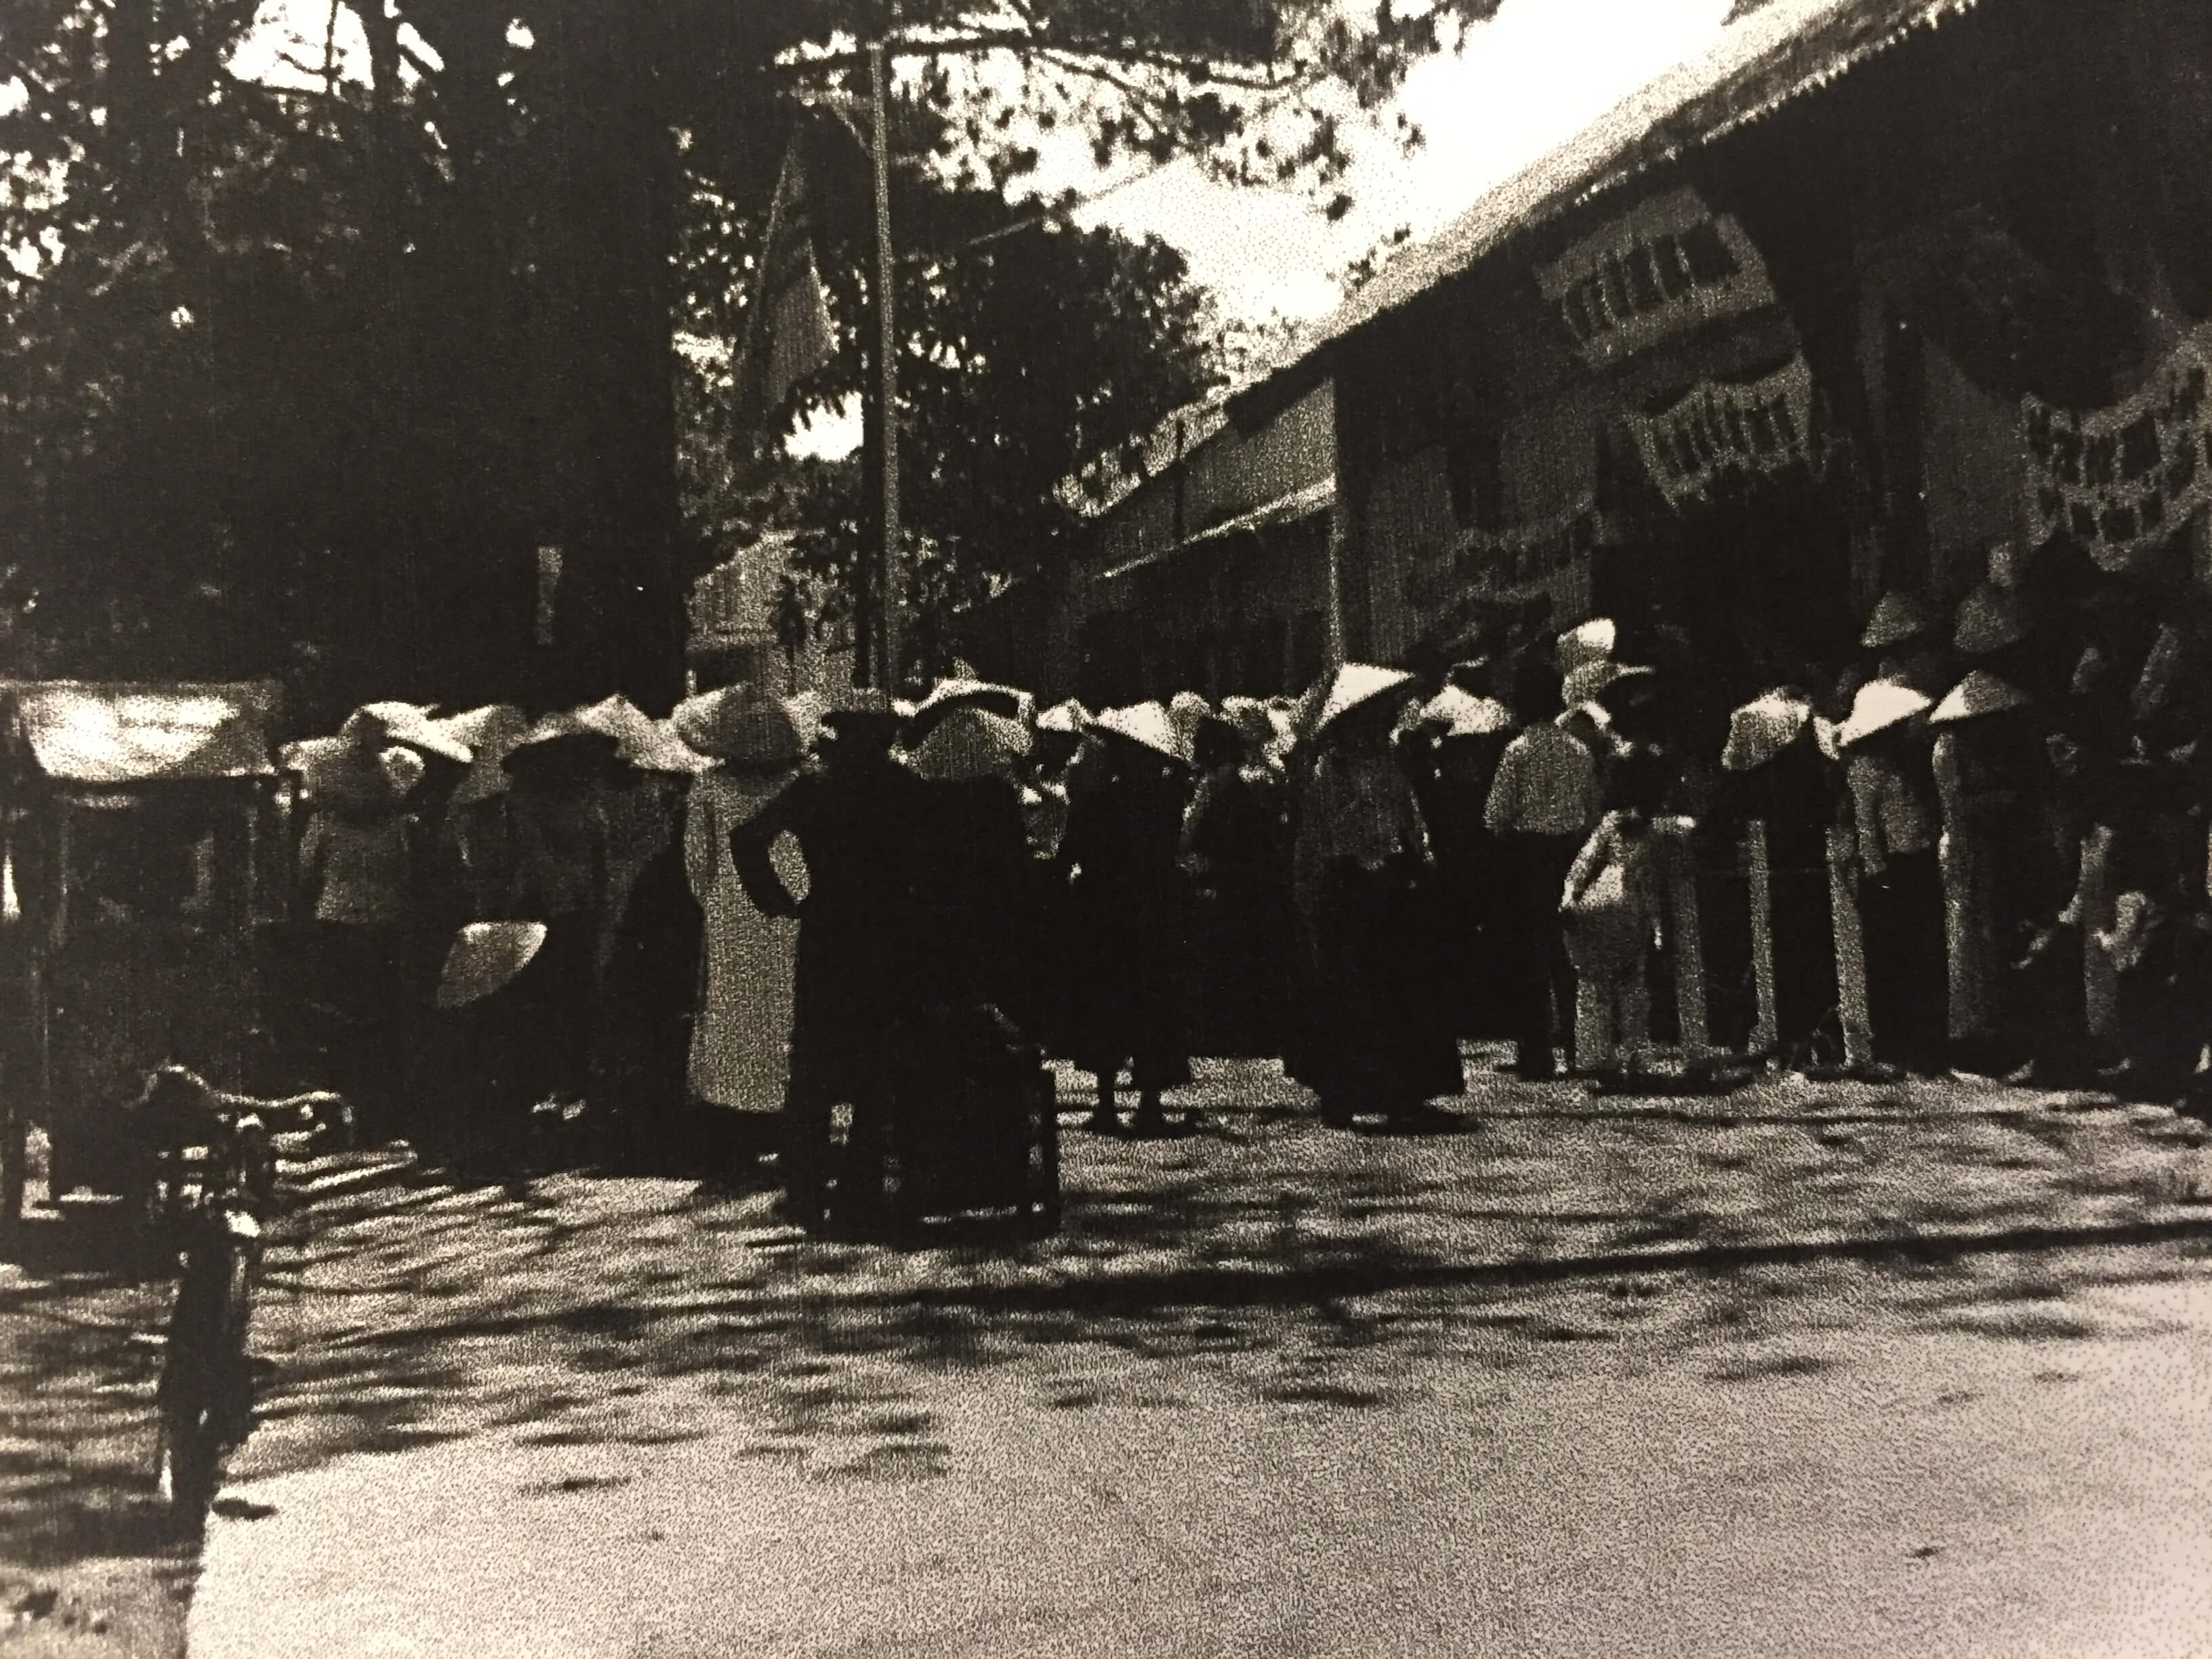 Women in straw, conical hats gathered in the dappled shade of the streets of a town.